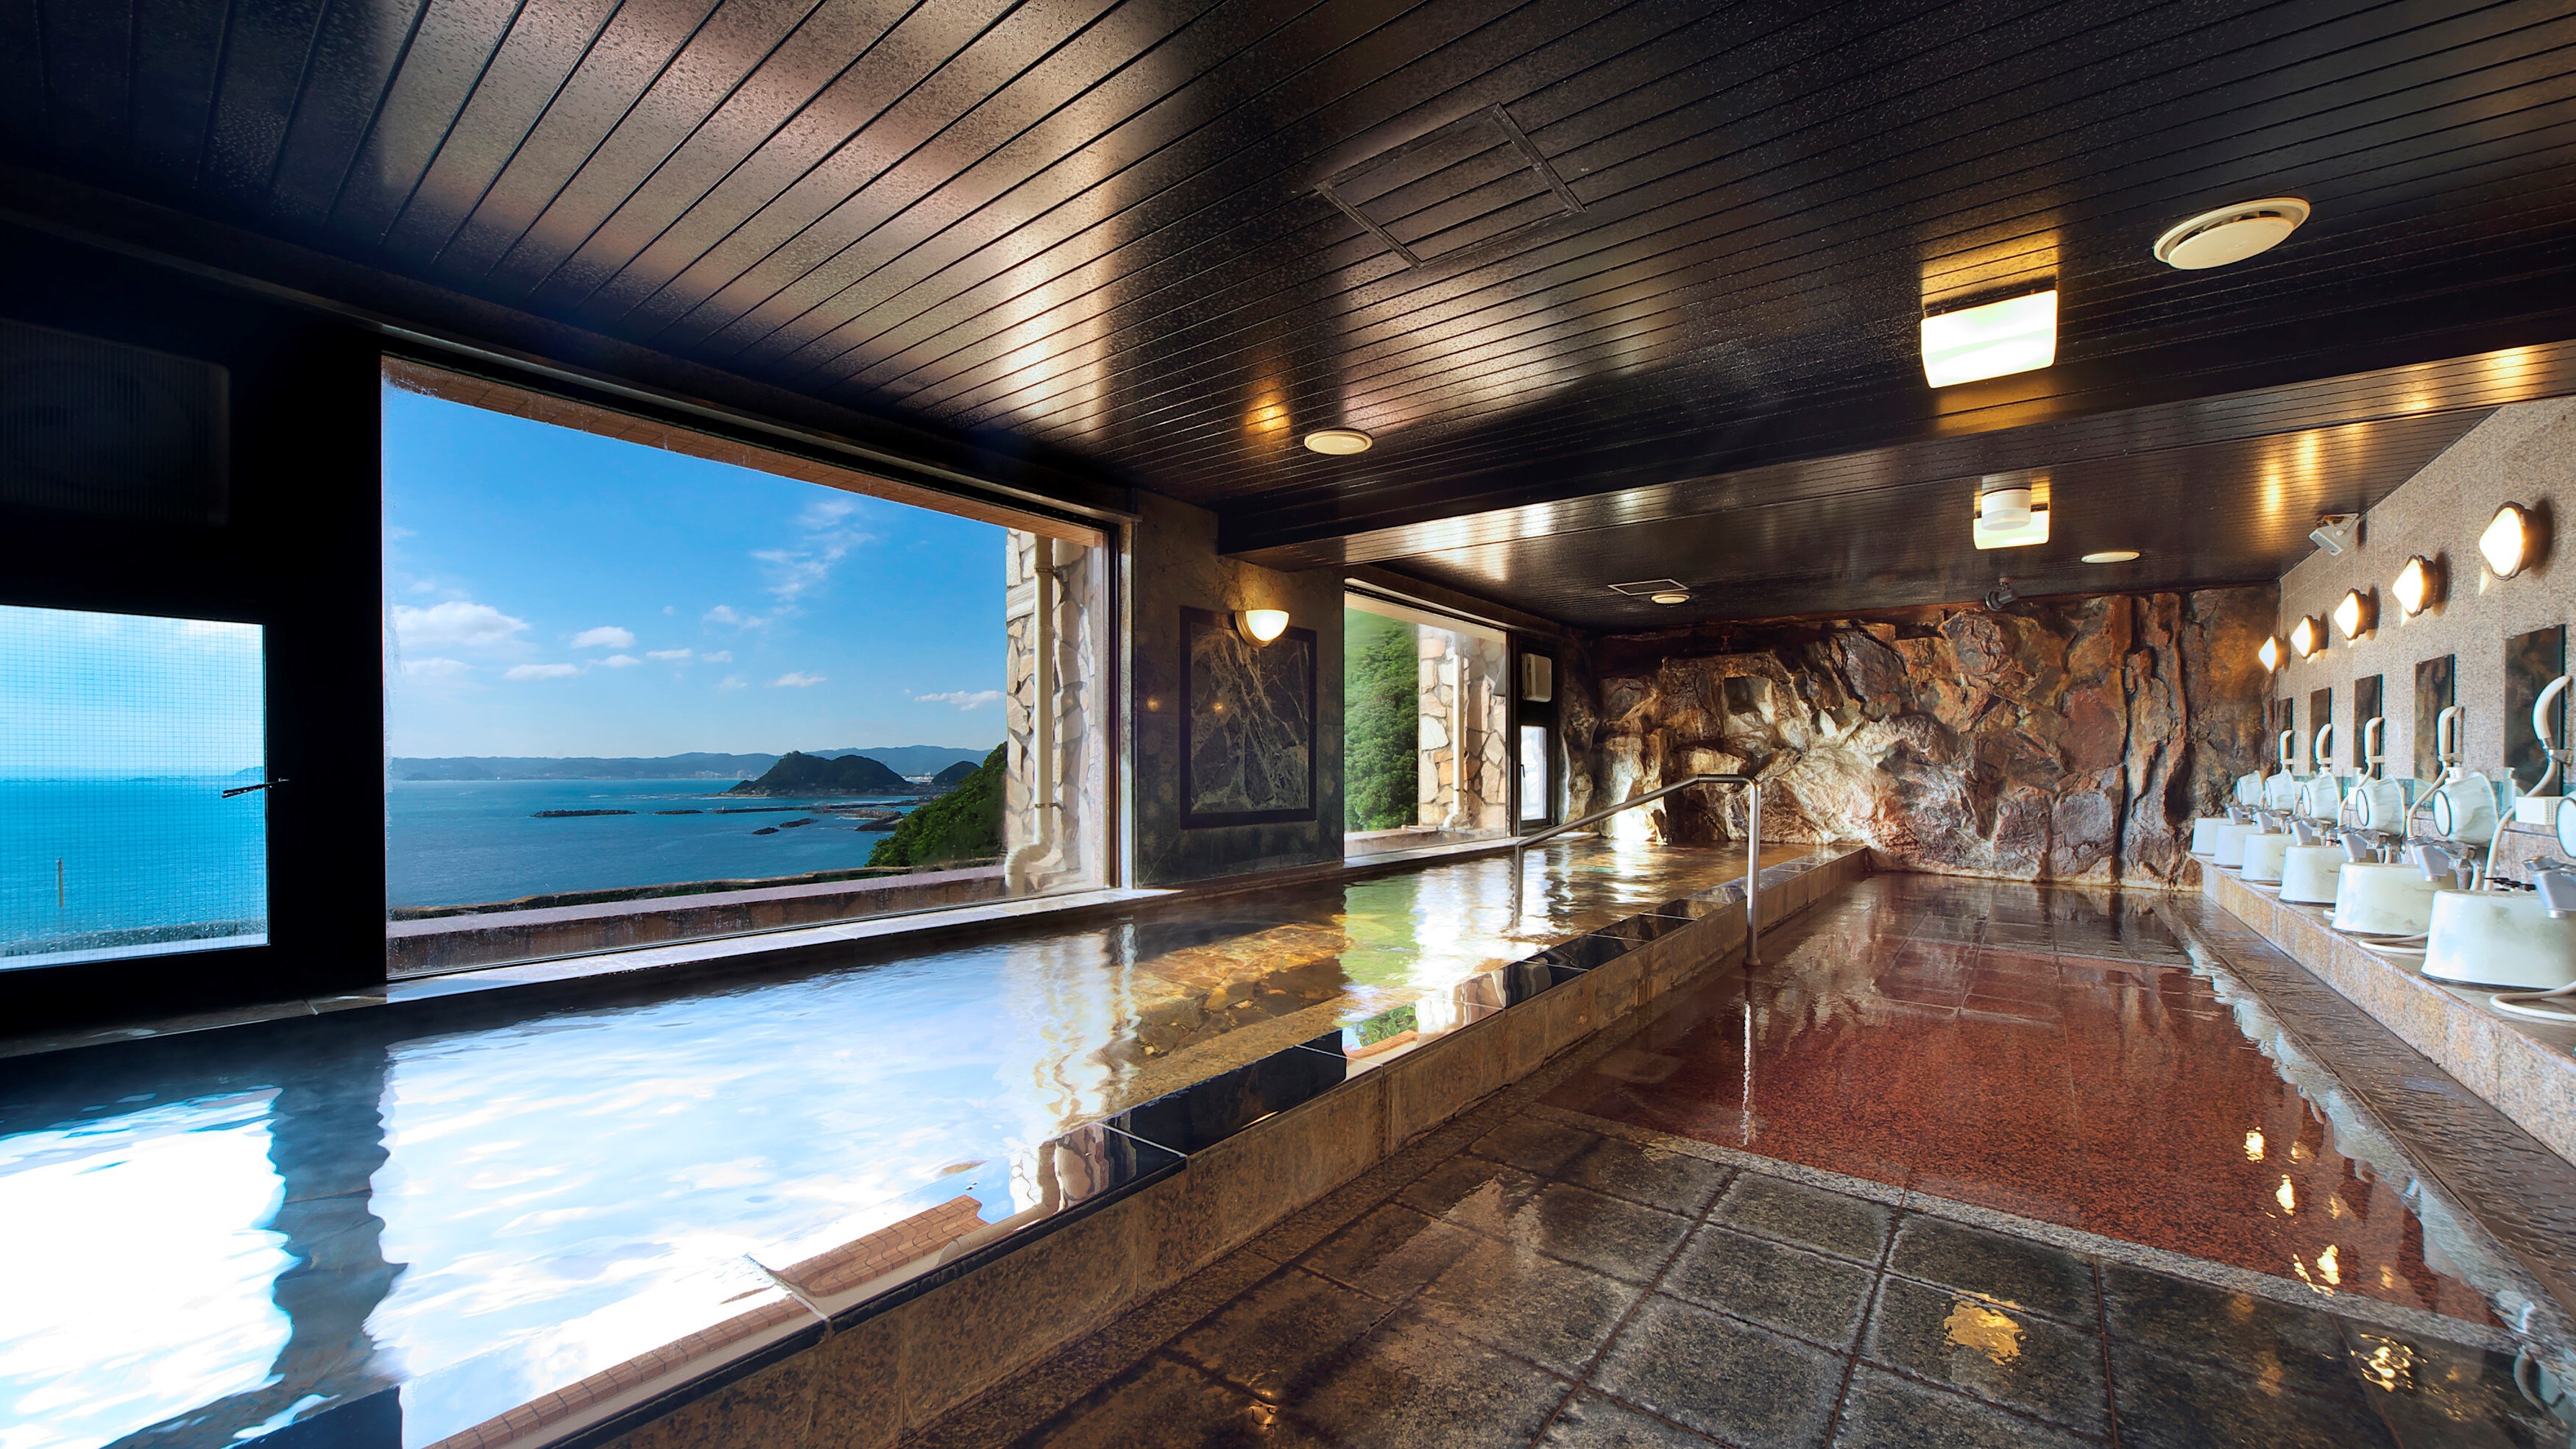 A bathhouse with a panoramic view of the Pacific Ocean! (Tower building 6th floor observation bath)